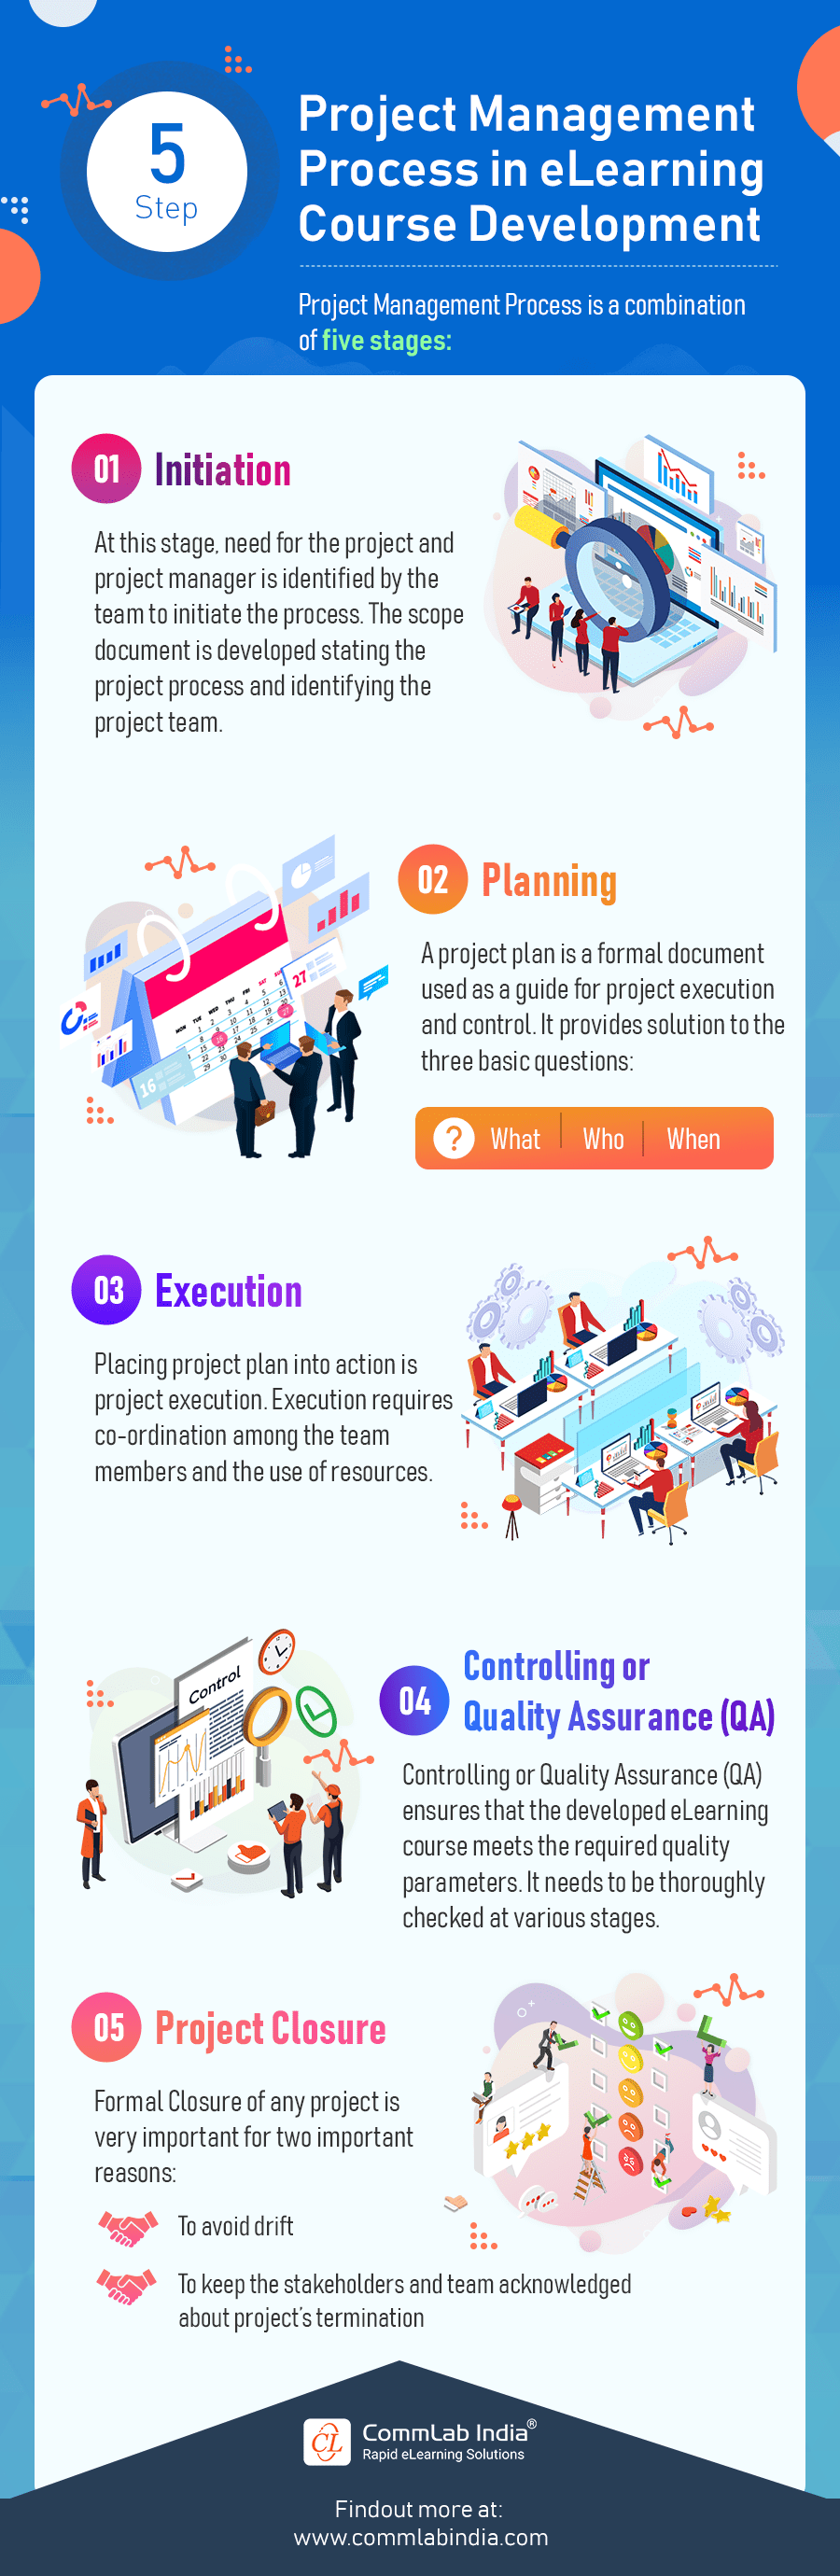 https://resources.commlabindia.com/hubfs/Imported_Blog_Media/elearning-design-development-project-management-process-infographic.png